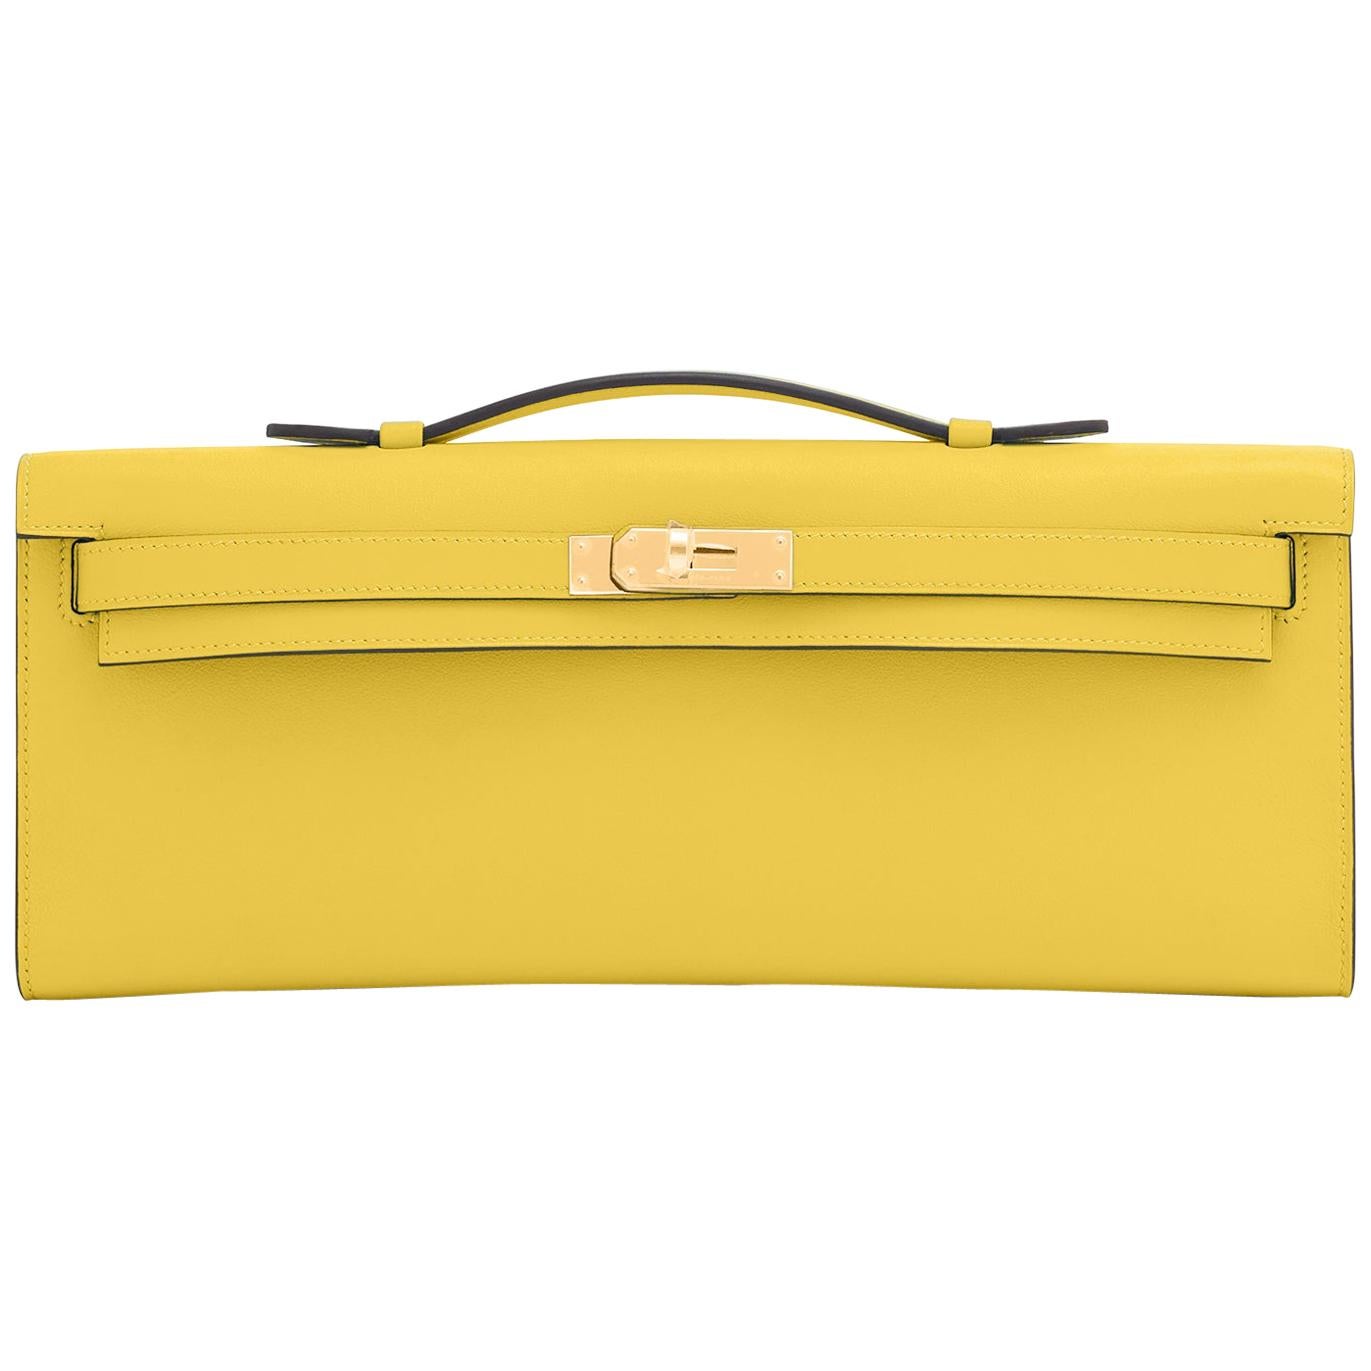 Hermes Kelly Cut Lime Swift Gold Hardware Y Stamp, 2020